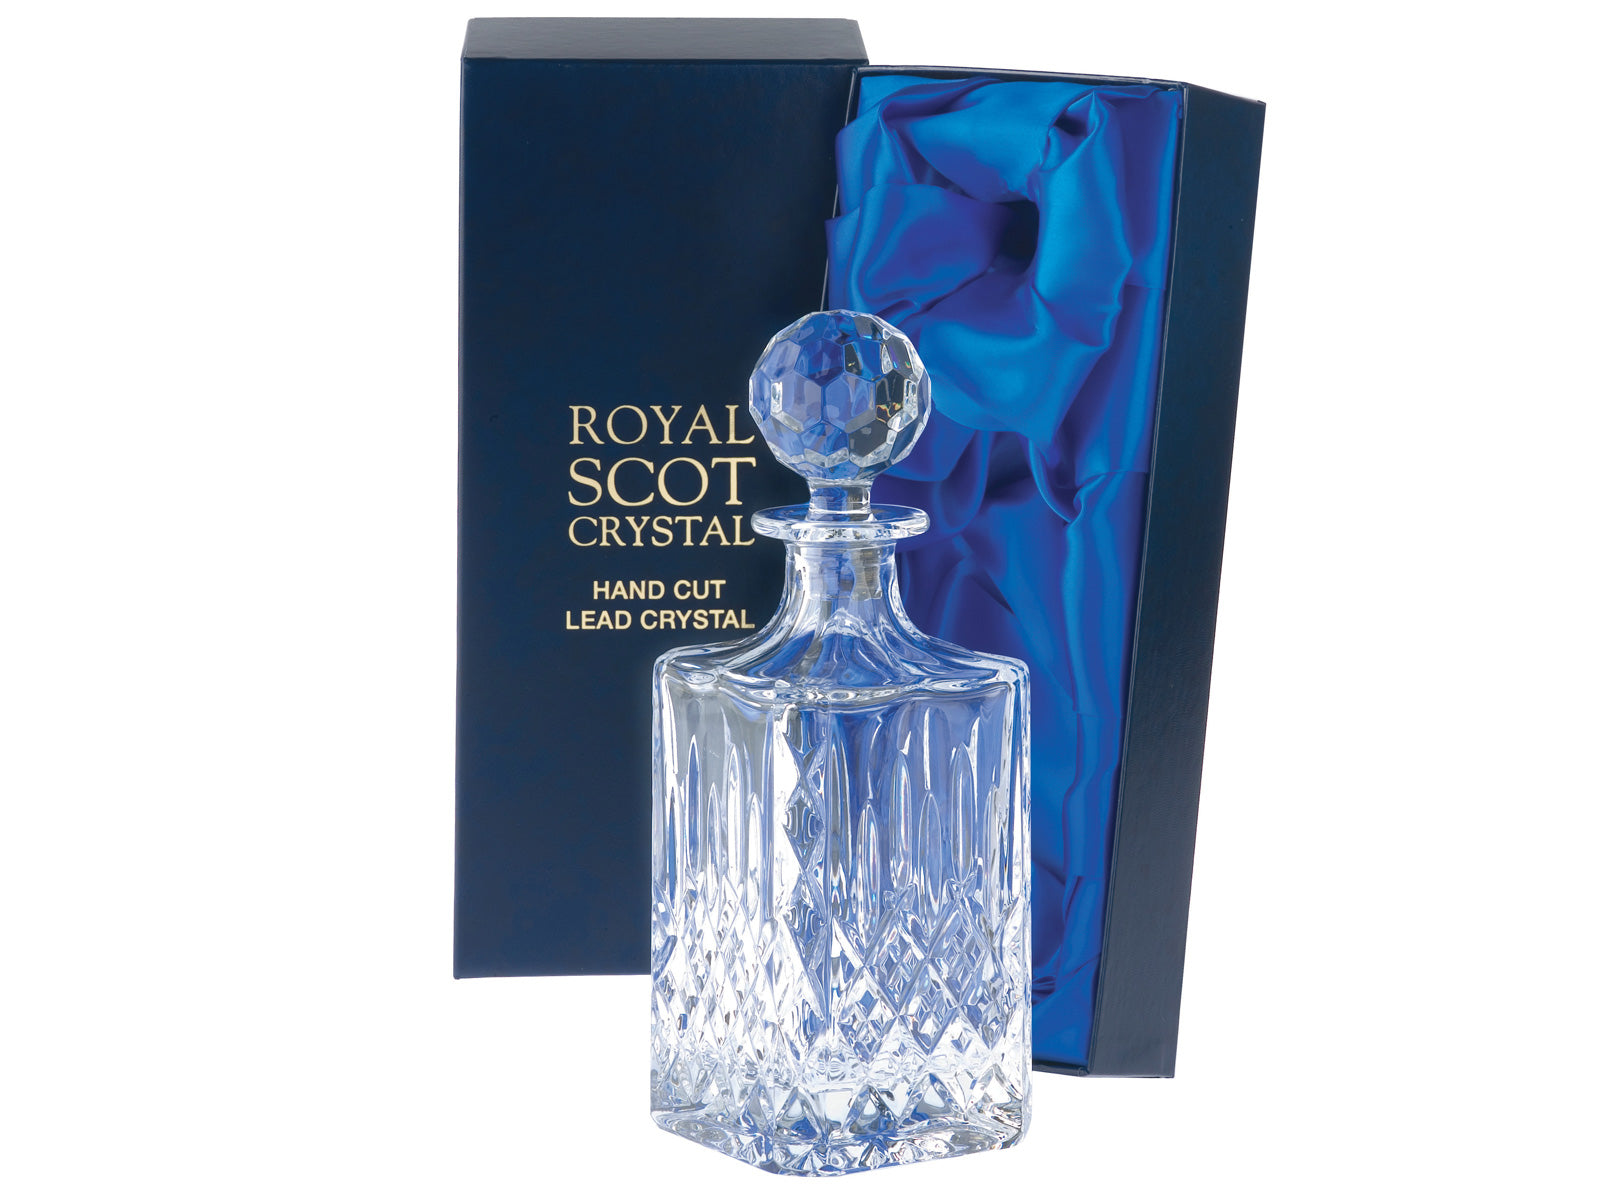 A square crystal spirit decanter with a bed of diamonds cut into the exterior, topped by single flicks up towards the top. It is stopped by a golf-ball shaped stopper. It comes in a navy blue silk-lined presentation box.